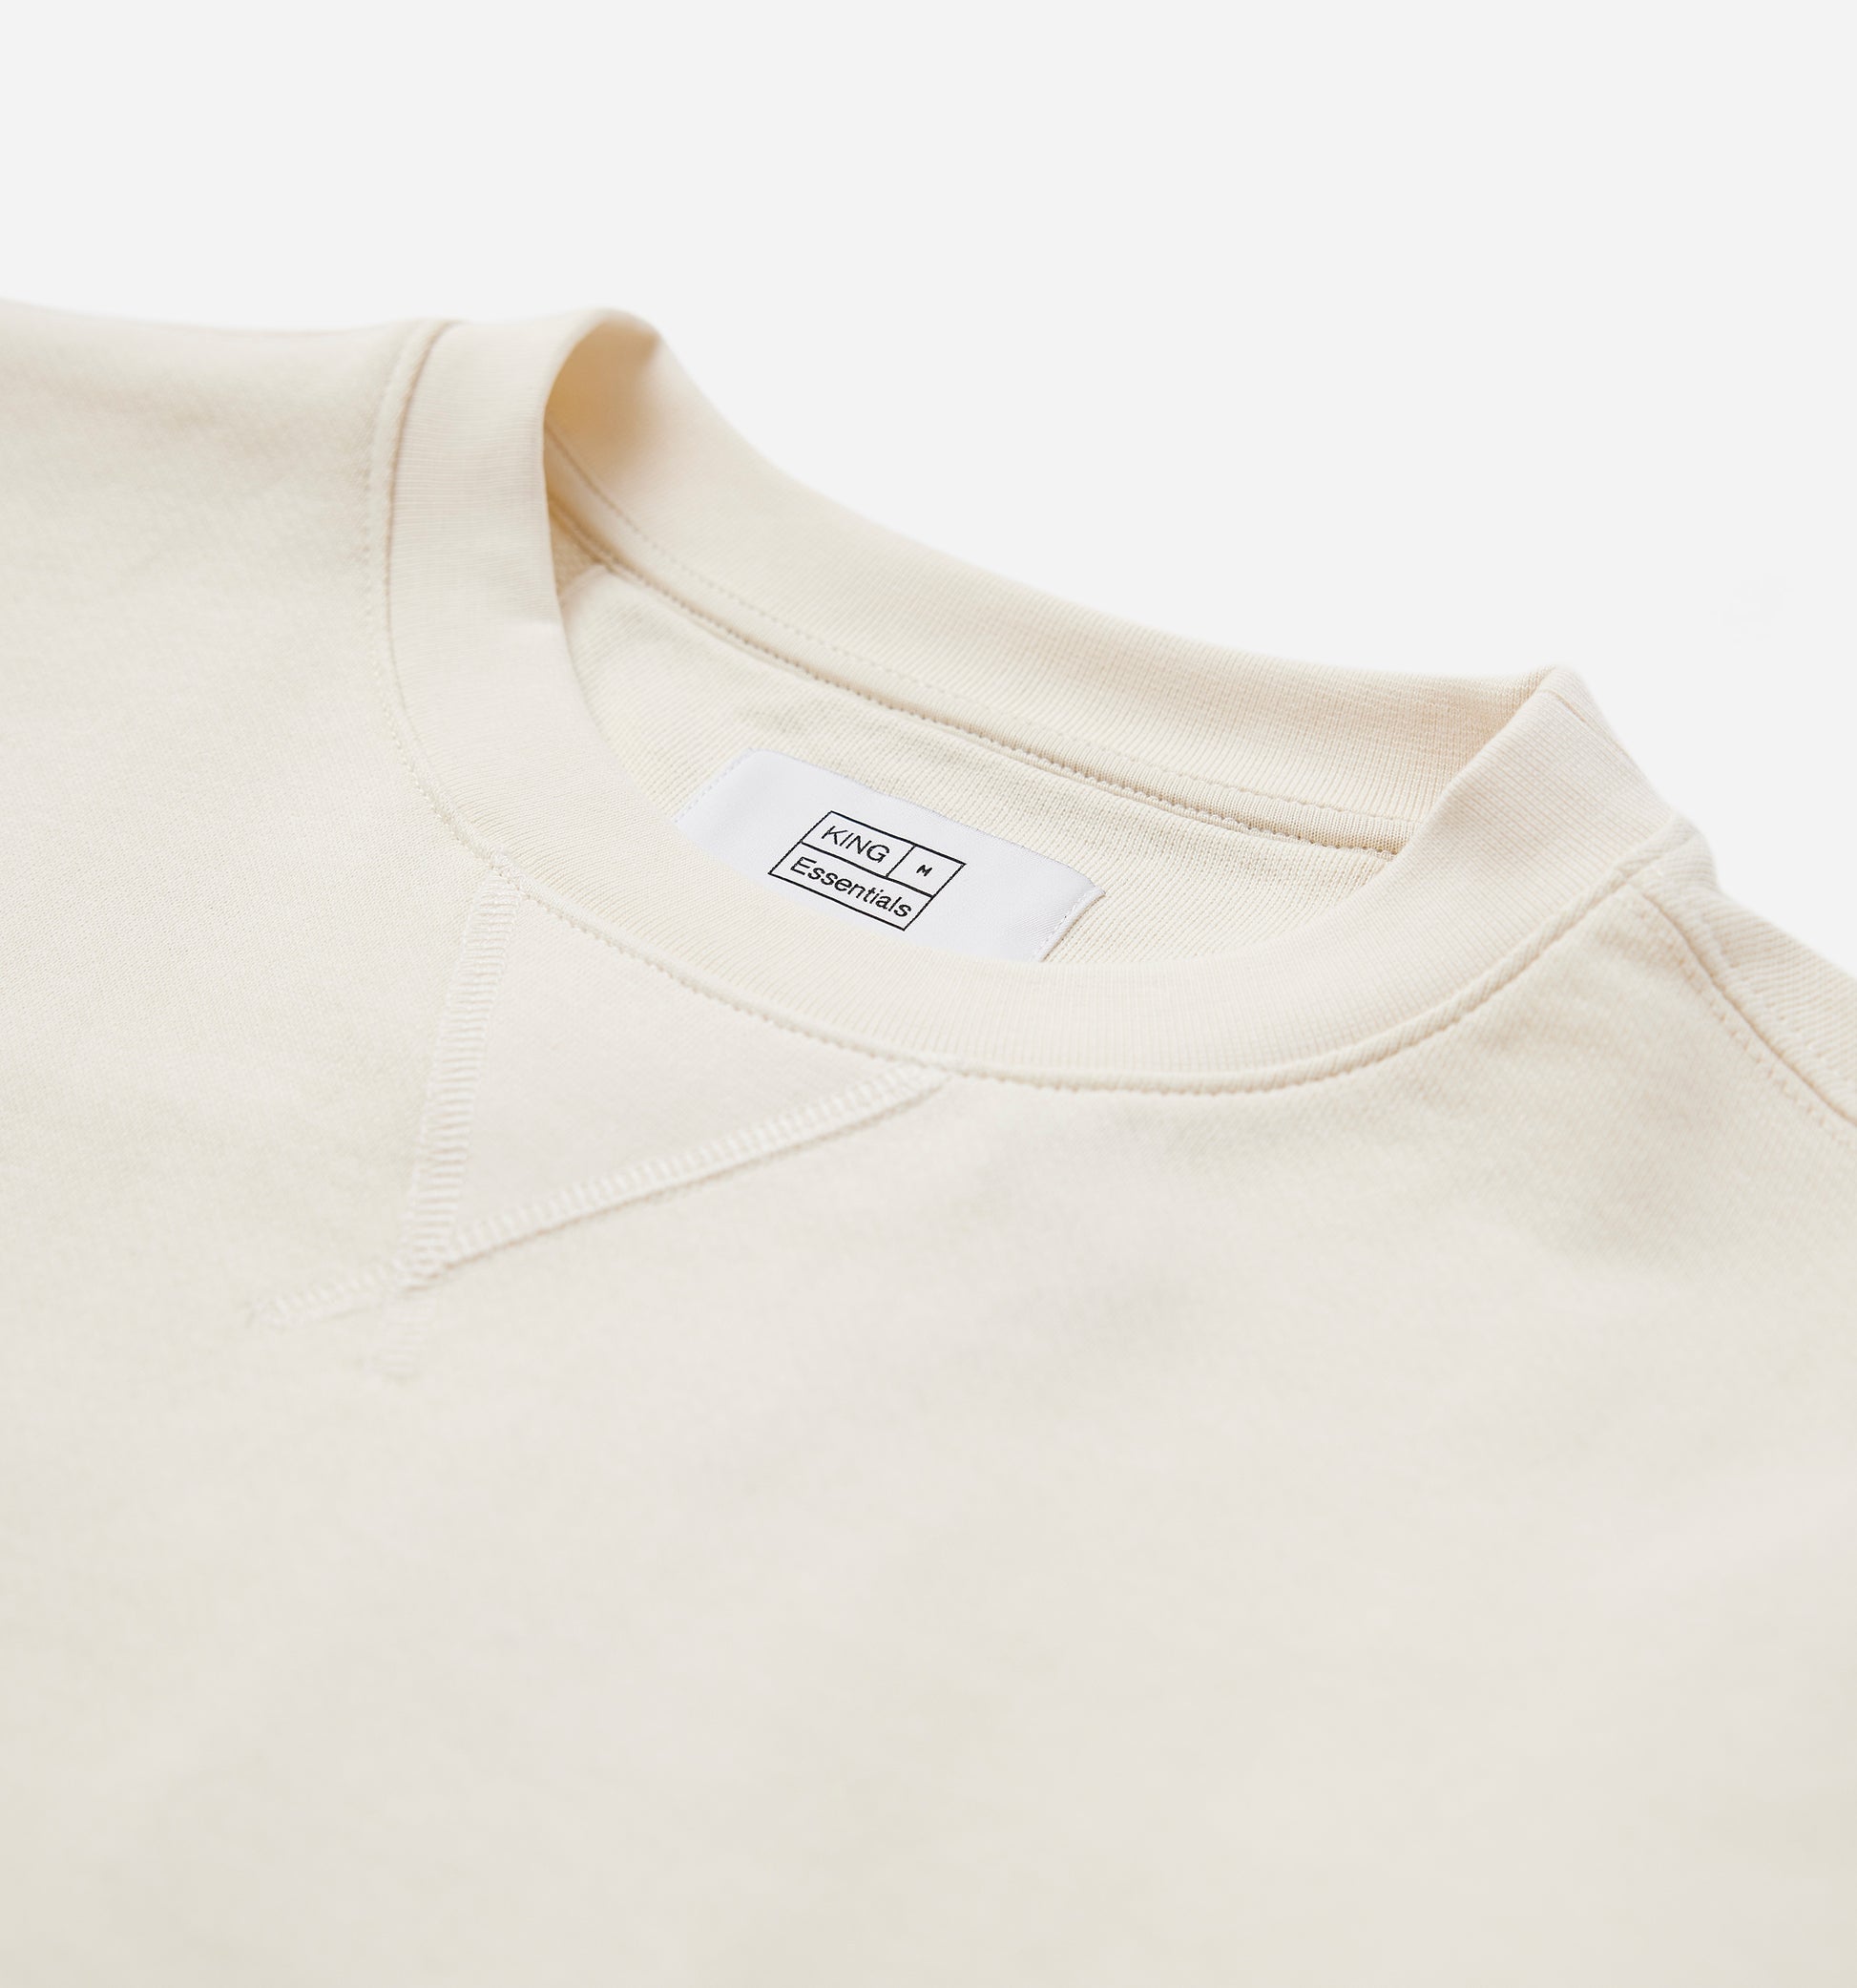 The George - French Terry Cotton Sweatshirt  In Beige From King Essentials